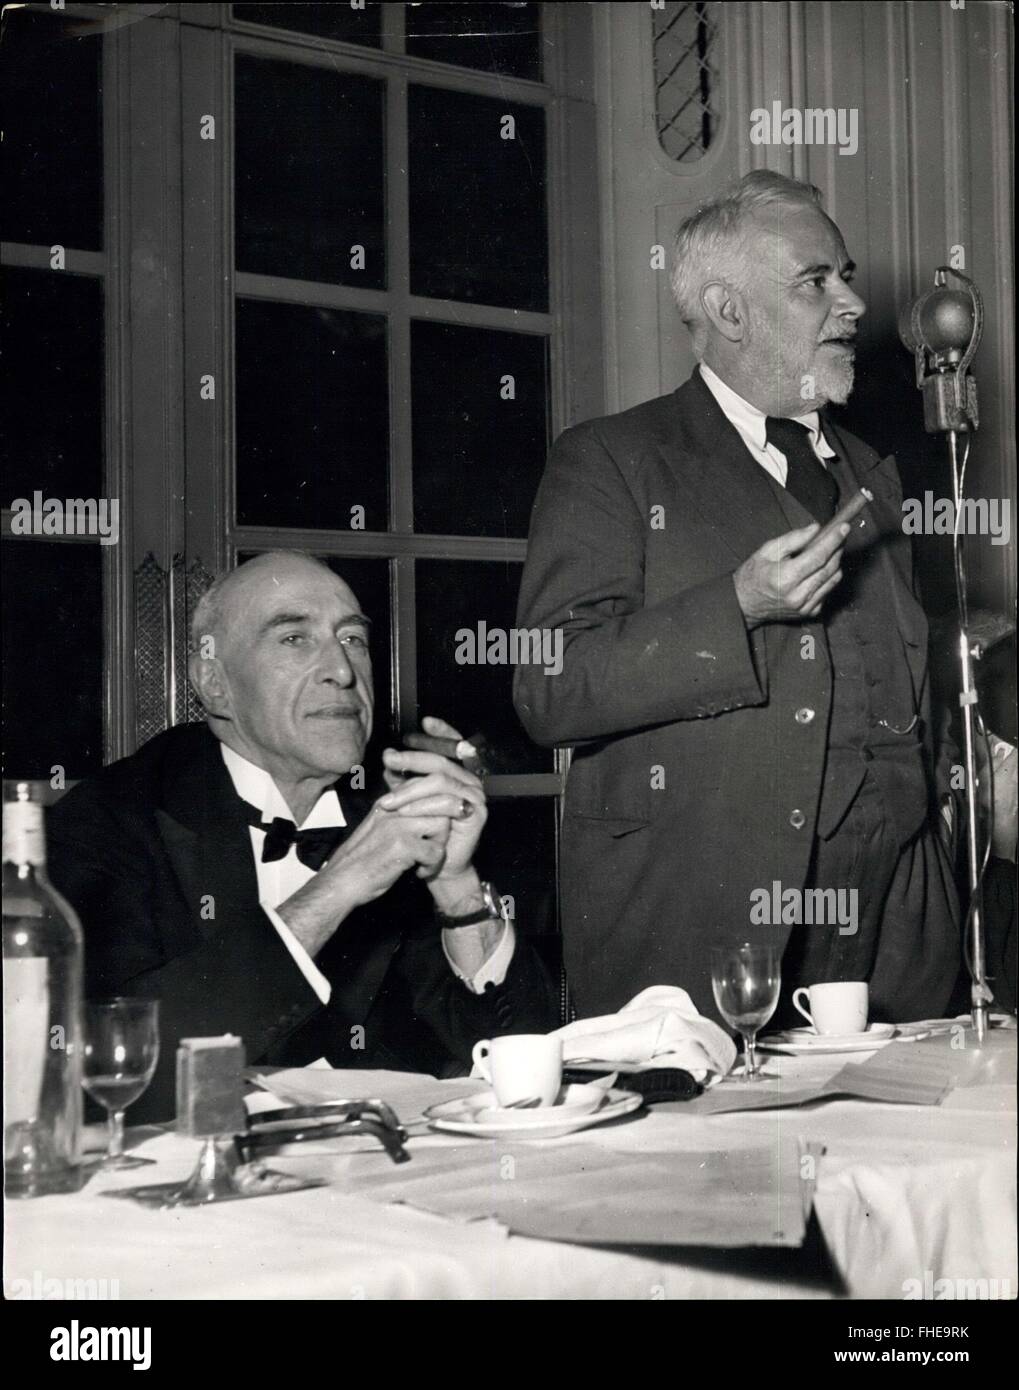 1934 - Harry Price and D. Joad at Ghost Club dinner. Harry Price (January 1881- March 1948) was a British psychic researcher and author, who gained public prominence for his investigations into psychical phenomena and his exposing of fake Spiritualists. He is best known for his well-publicized investigation of the purportedly haunted Borley Rectory in Essex, England. © Keystone Pictures USA/ZUMAPRESS.com/Alamy Live News Stock Photo